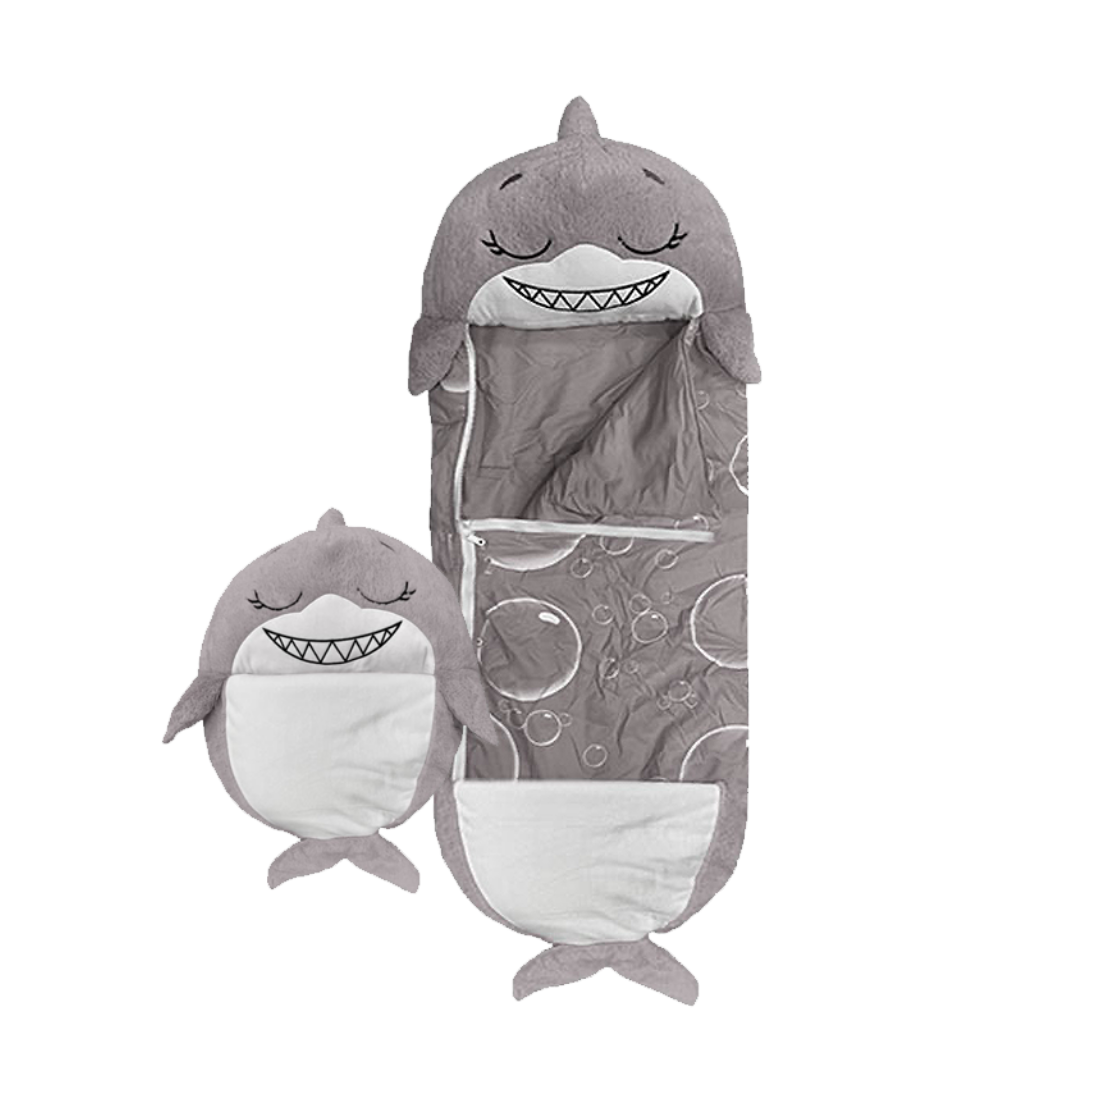 View Happy Nappers Grey Shark Medium Ages 3 To 6 Plush Toy That Opens To A Fun Sleeping Bag High Street TV information